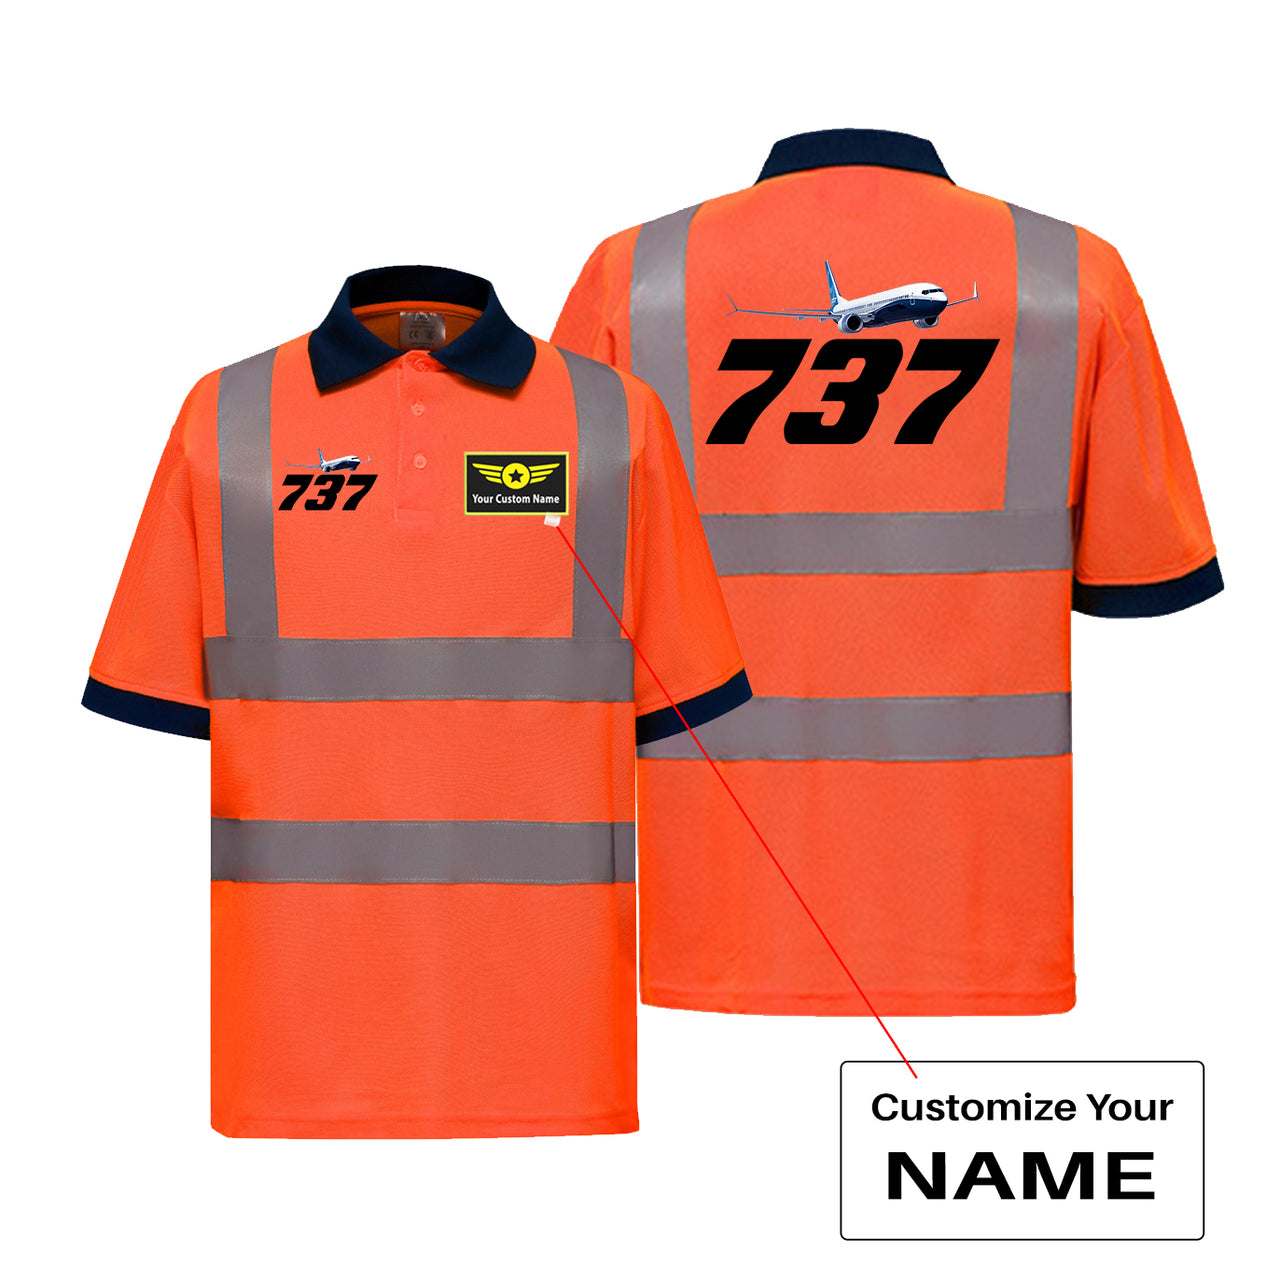 Super Boeing 737-800 Designed Reflective Polo T-Shirts